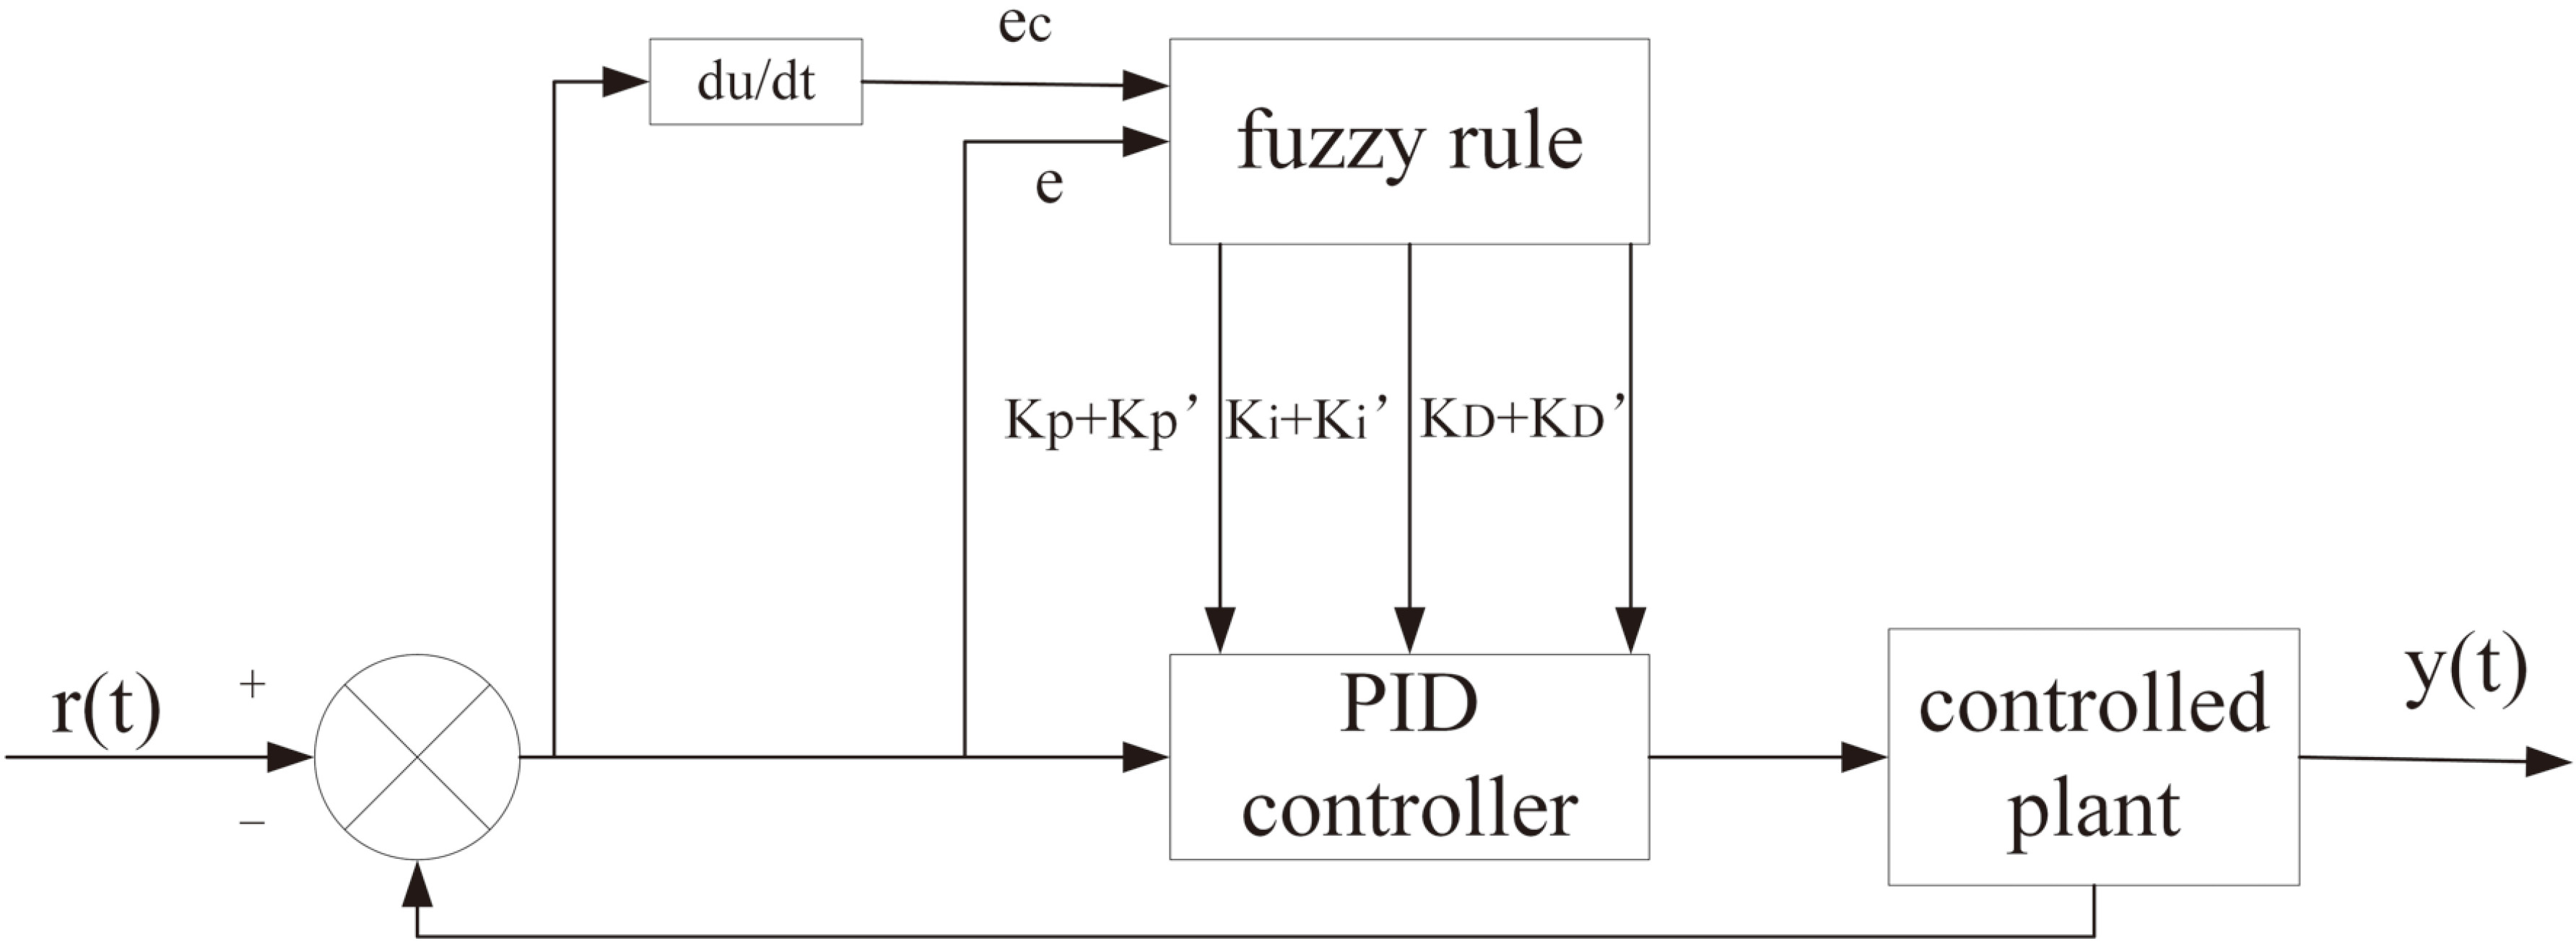 Power adaptive control based on PID.